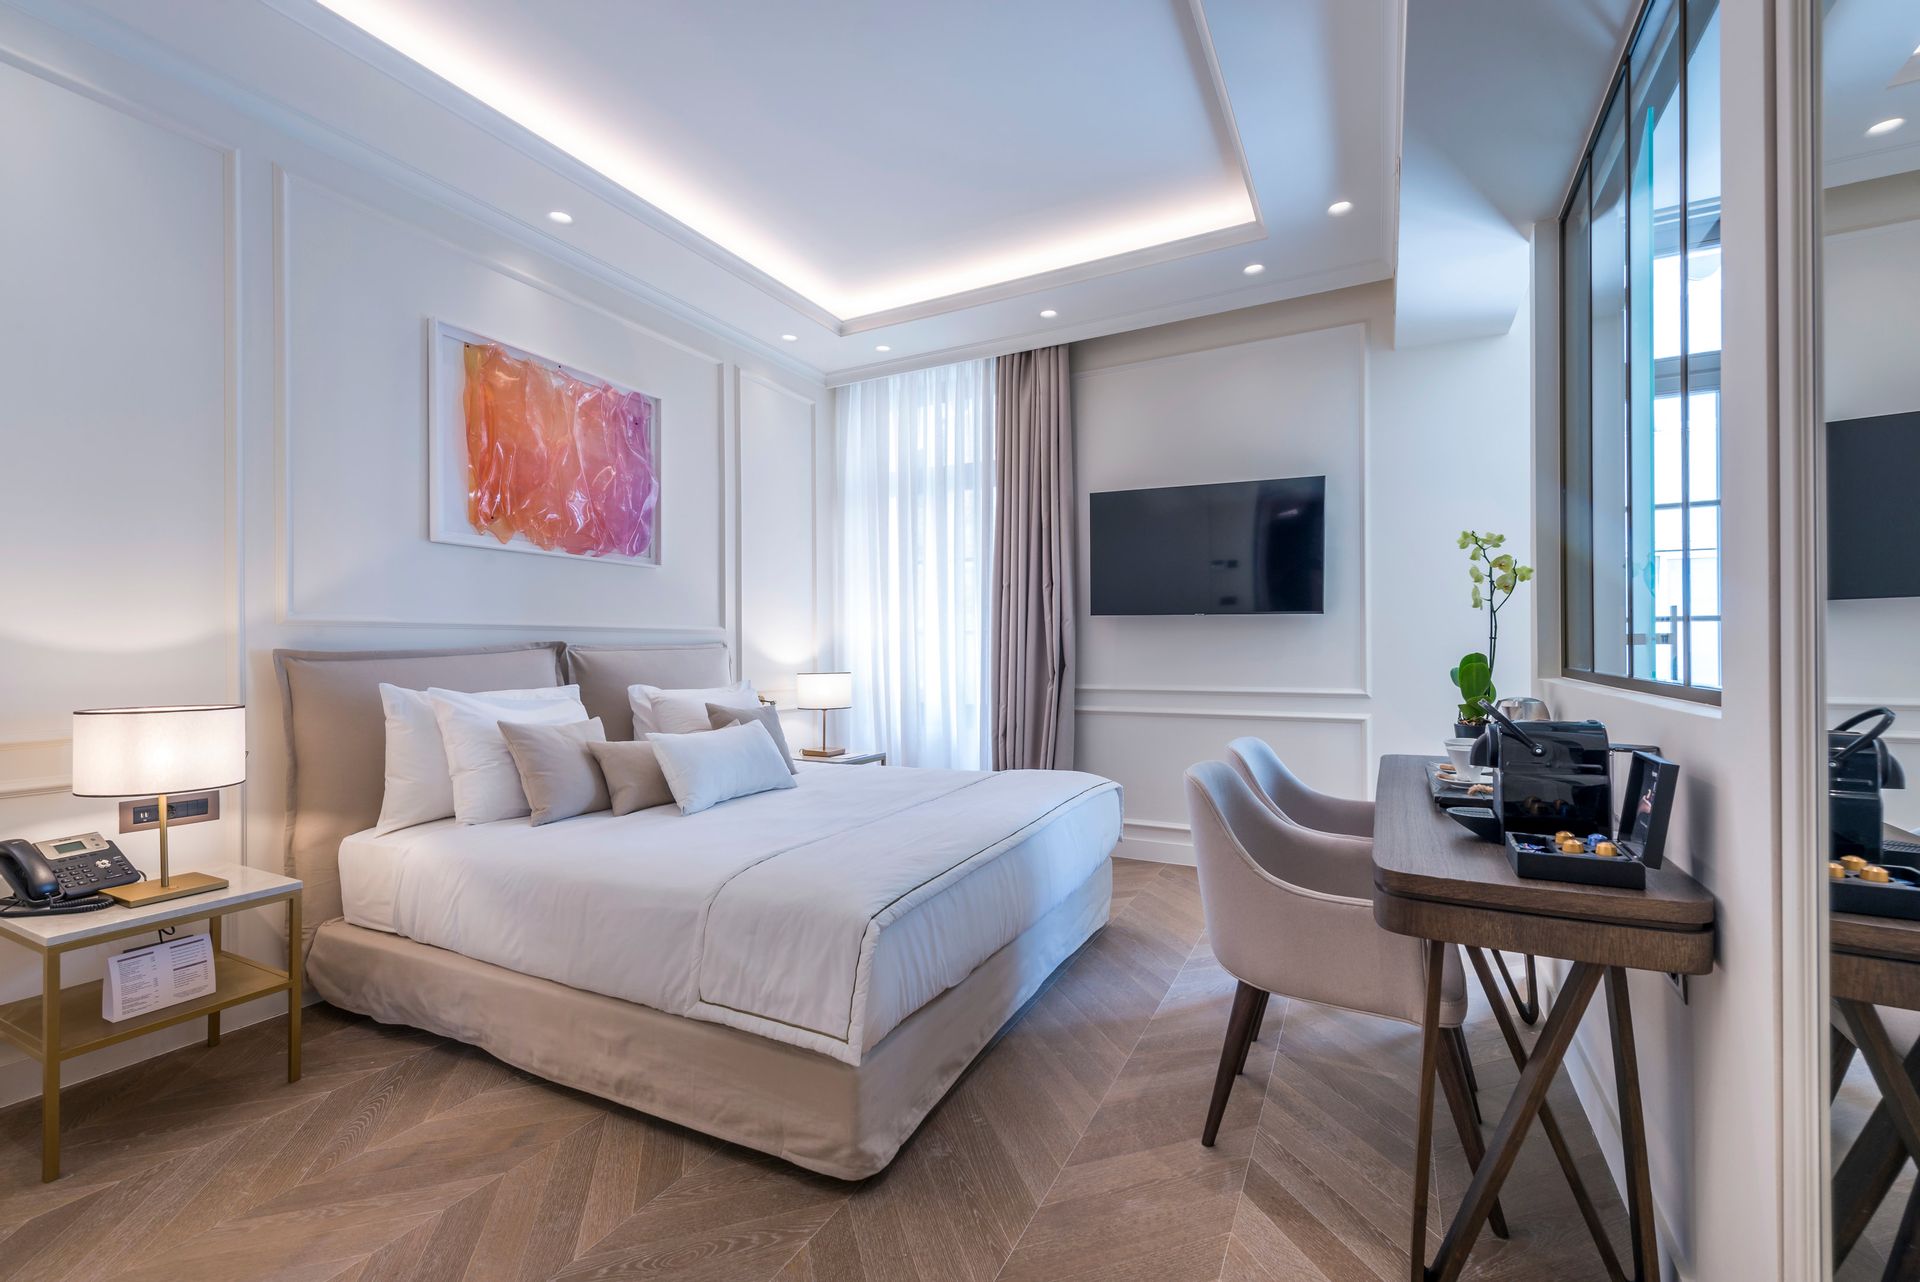 The Residence Aiolou Suites & SPA - Αθήνα ✦ 2 Ημέρες